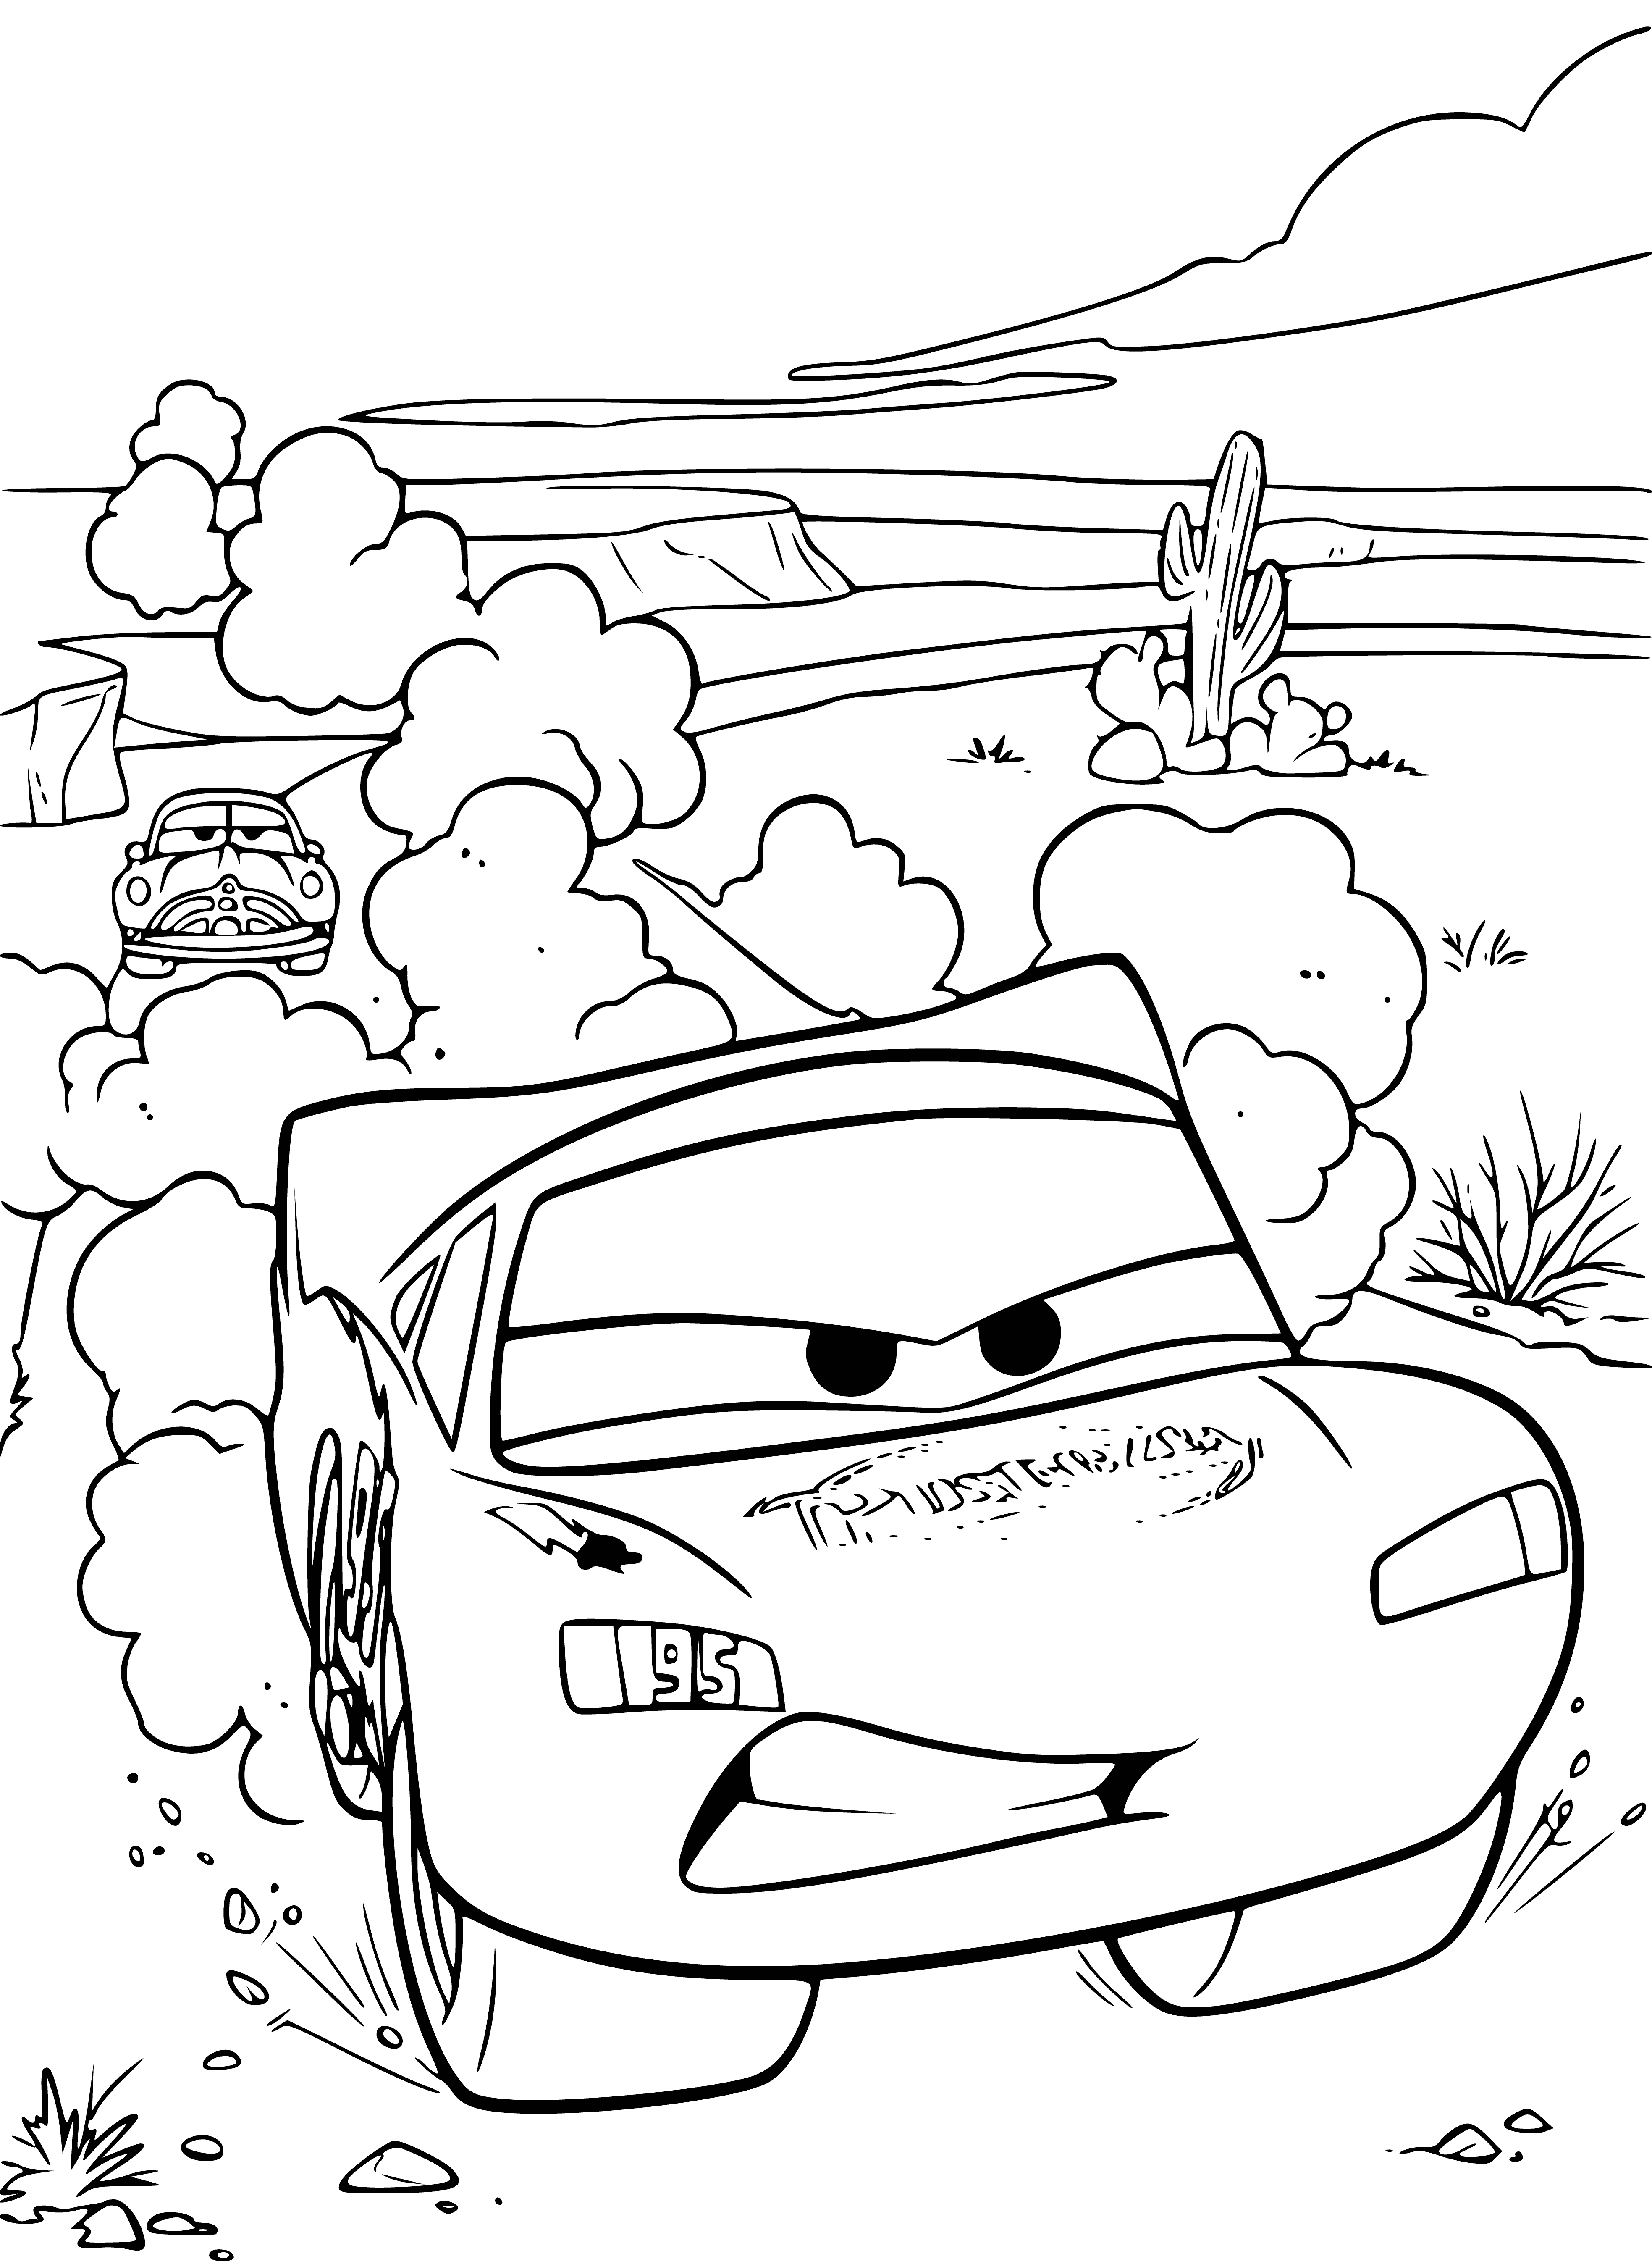 McQueen in front coloring page